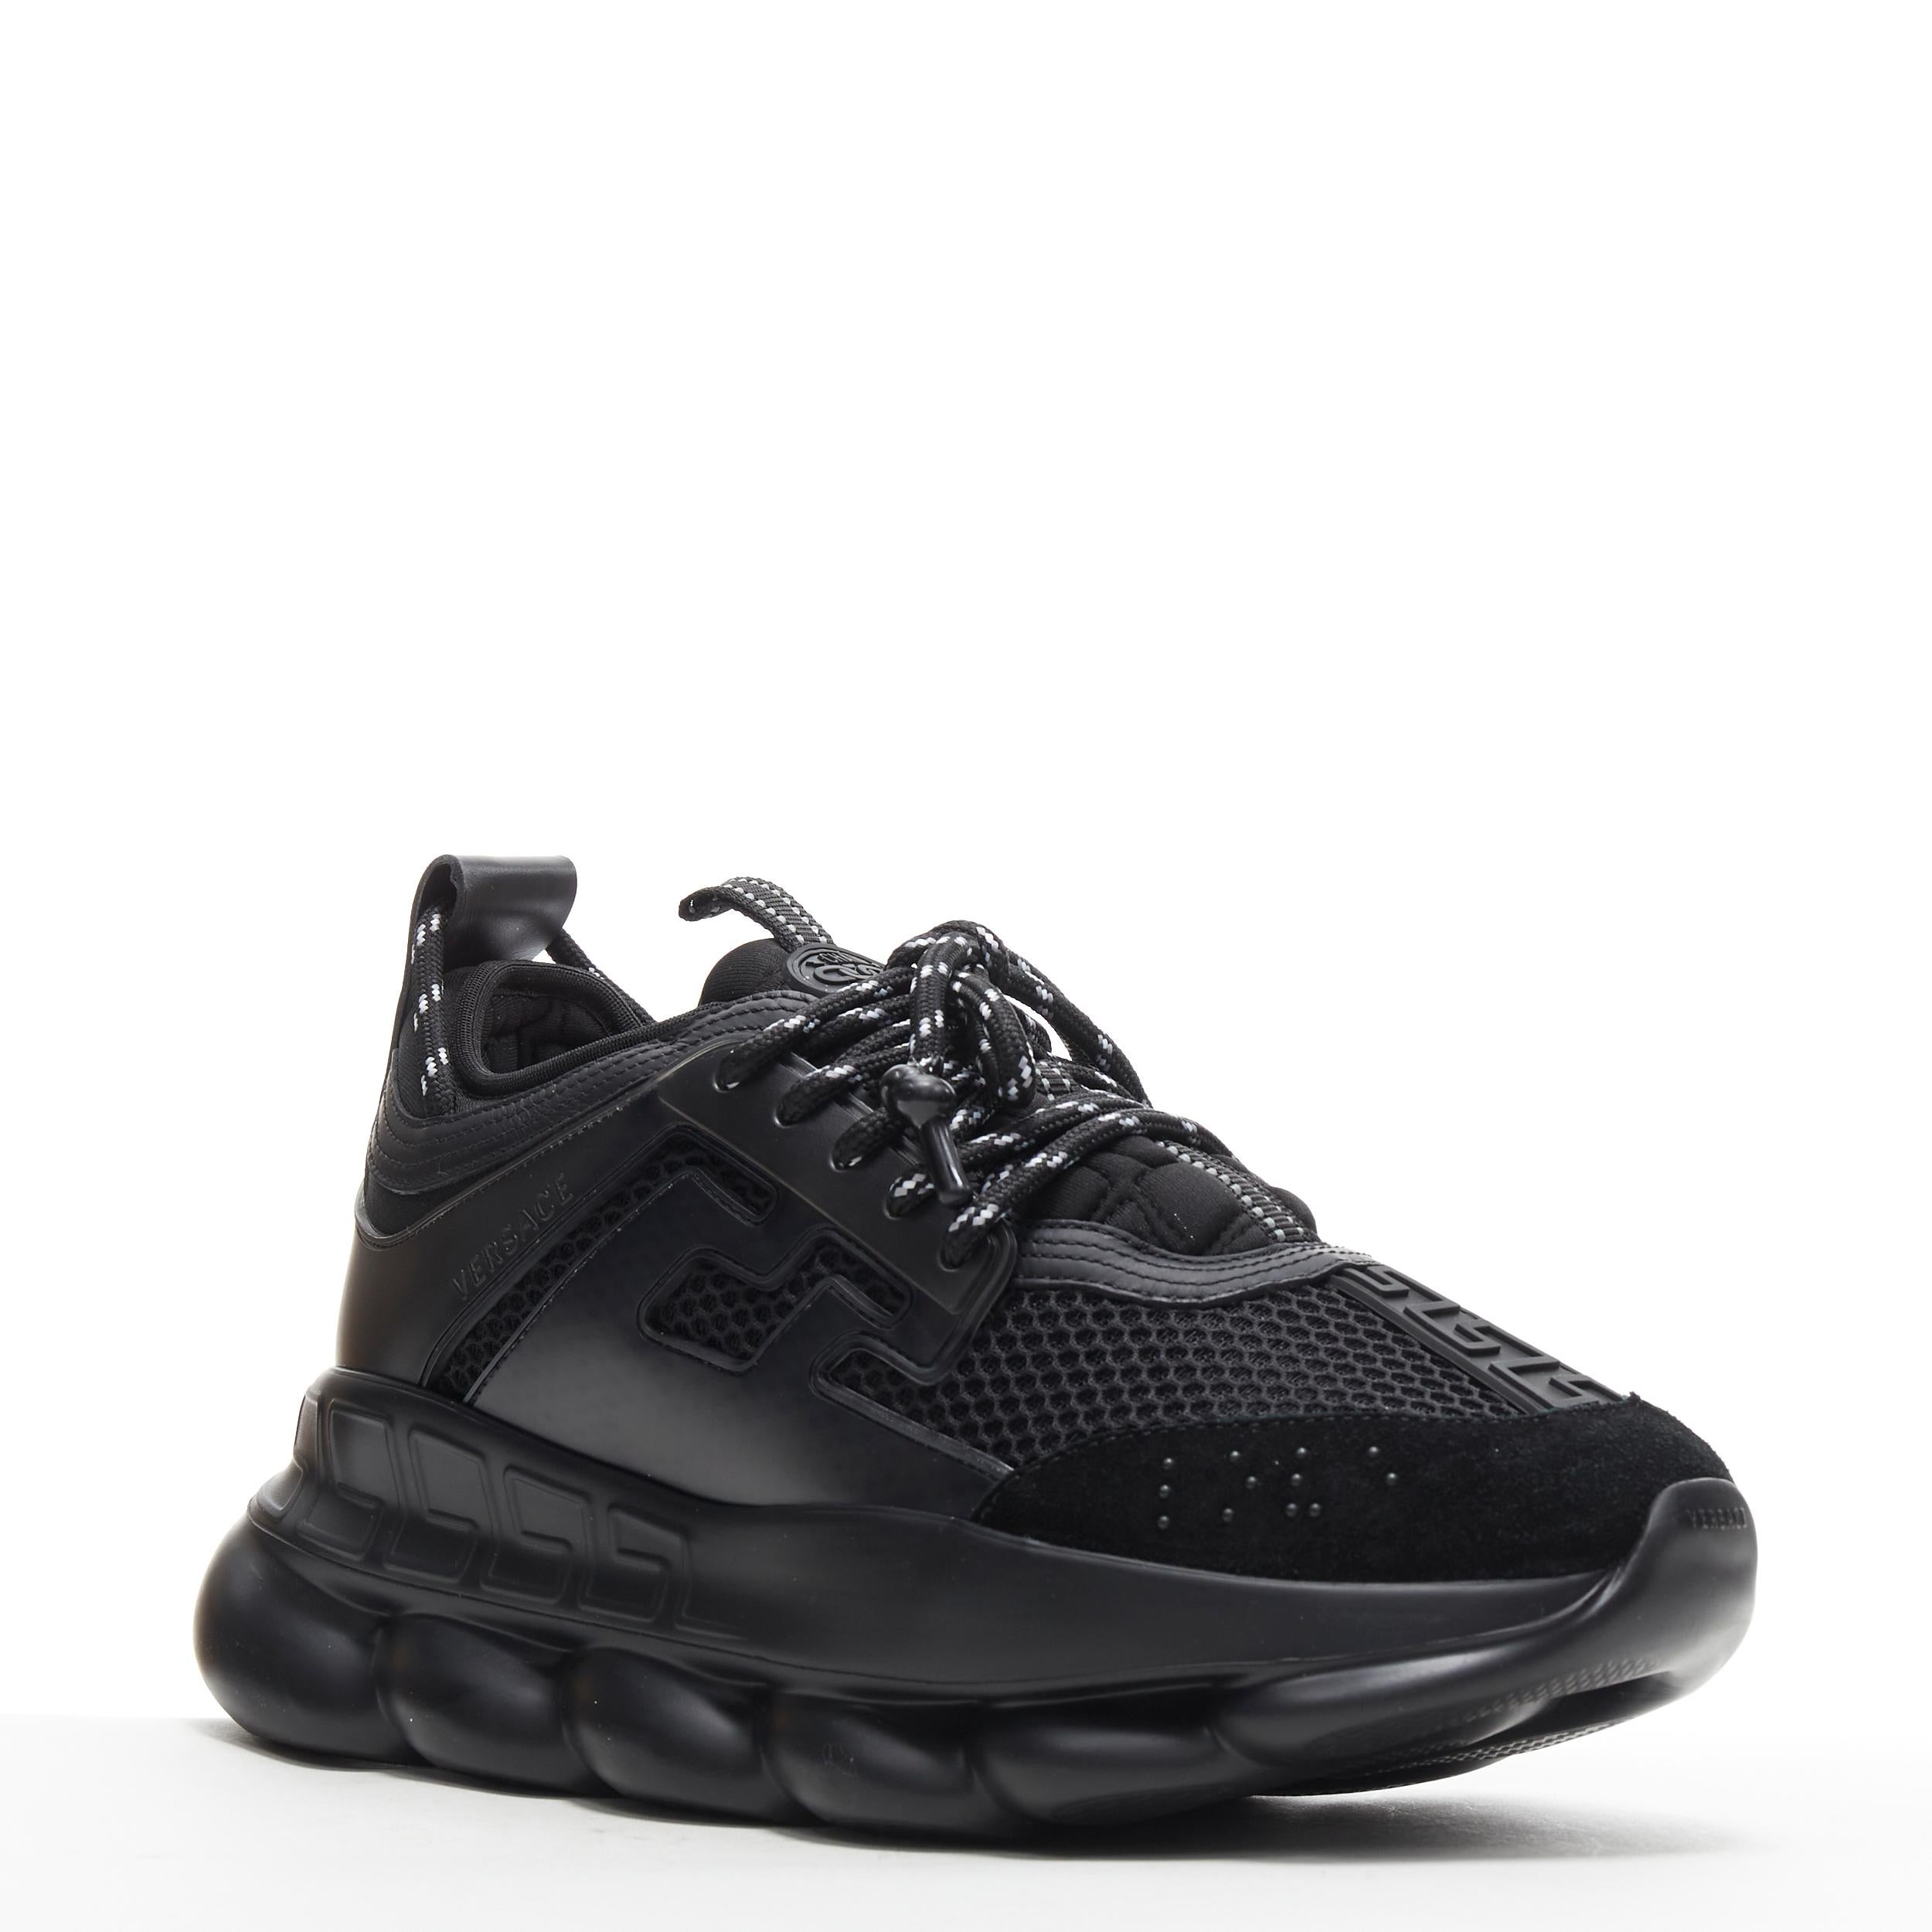 new VERSACE Chain Reaction Triple Black Nero low chunky sole sneaker EU40 US7 
Reference: TGAS/B00861 
Brand: Versace 
Designer: Salehe Bembury
Model: Chain Reaction Triple Black 
Material: Leather 
Color: Black 
Pattern: Solid 
Closure: Lace up